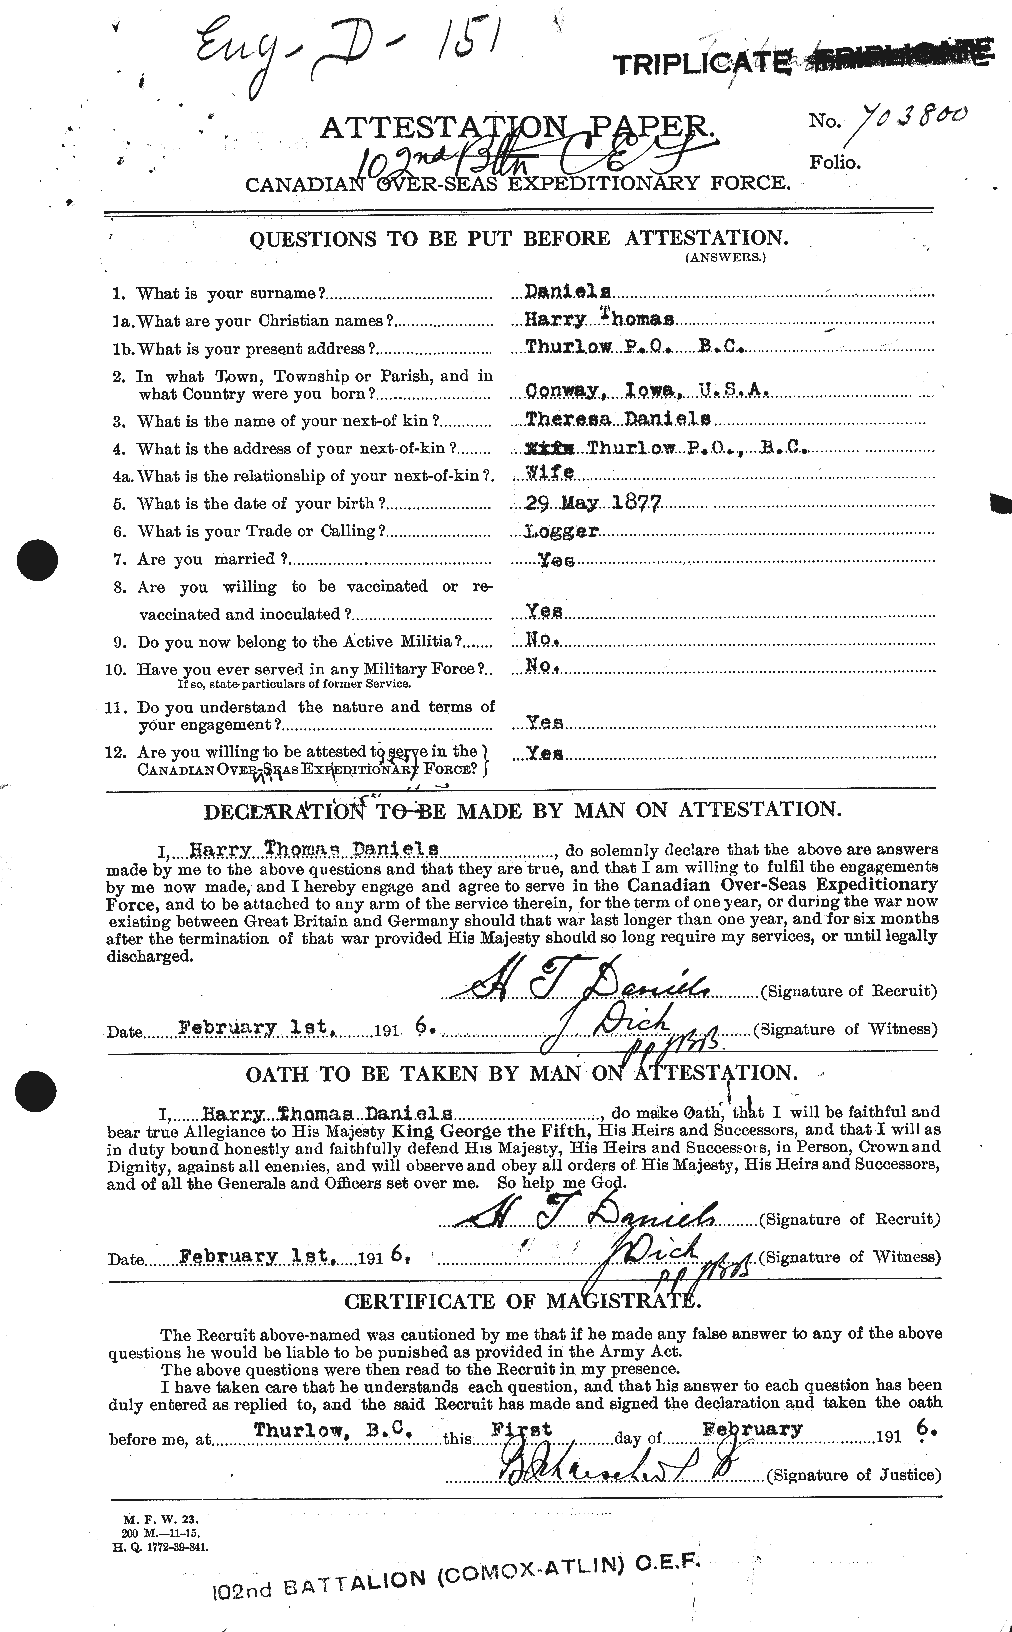 Personnel Records of the First World War - CEF 279613a